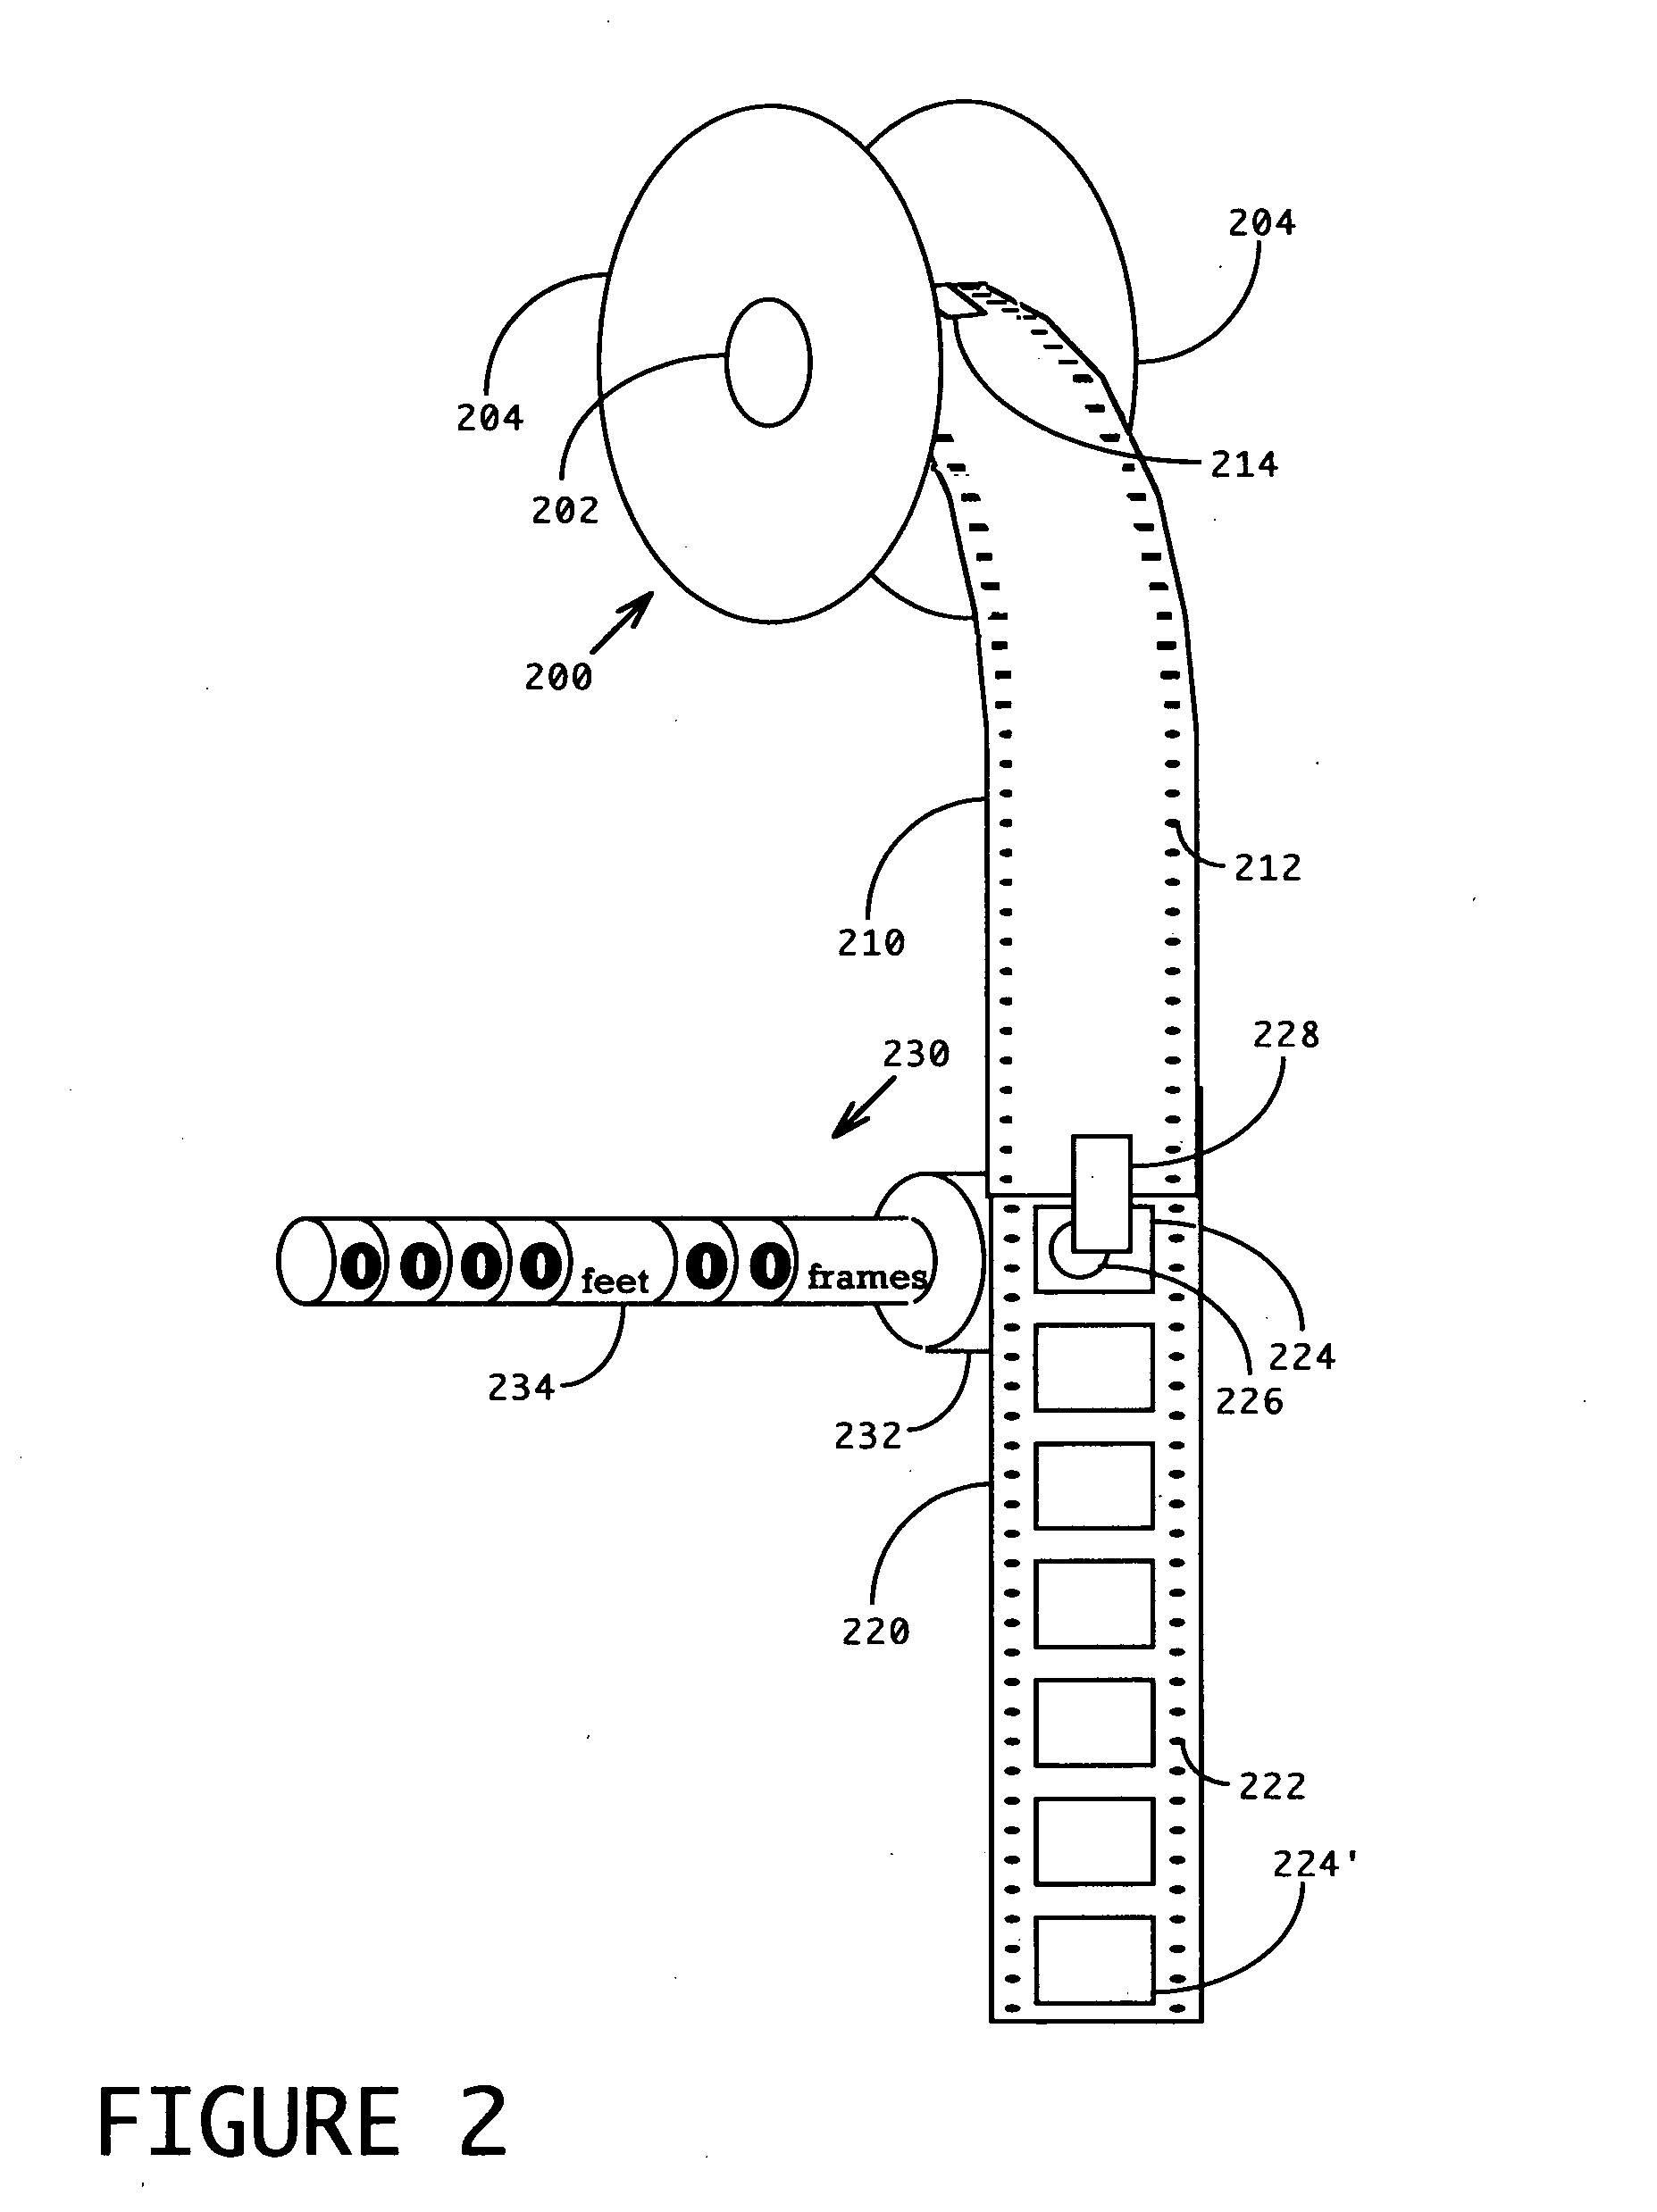 Method and apparatus for improved access to a compacted motion picture asset archive